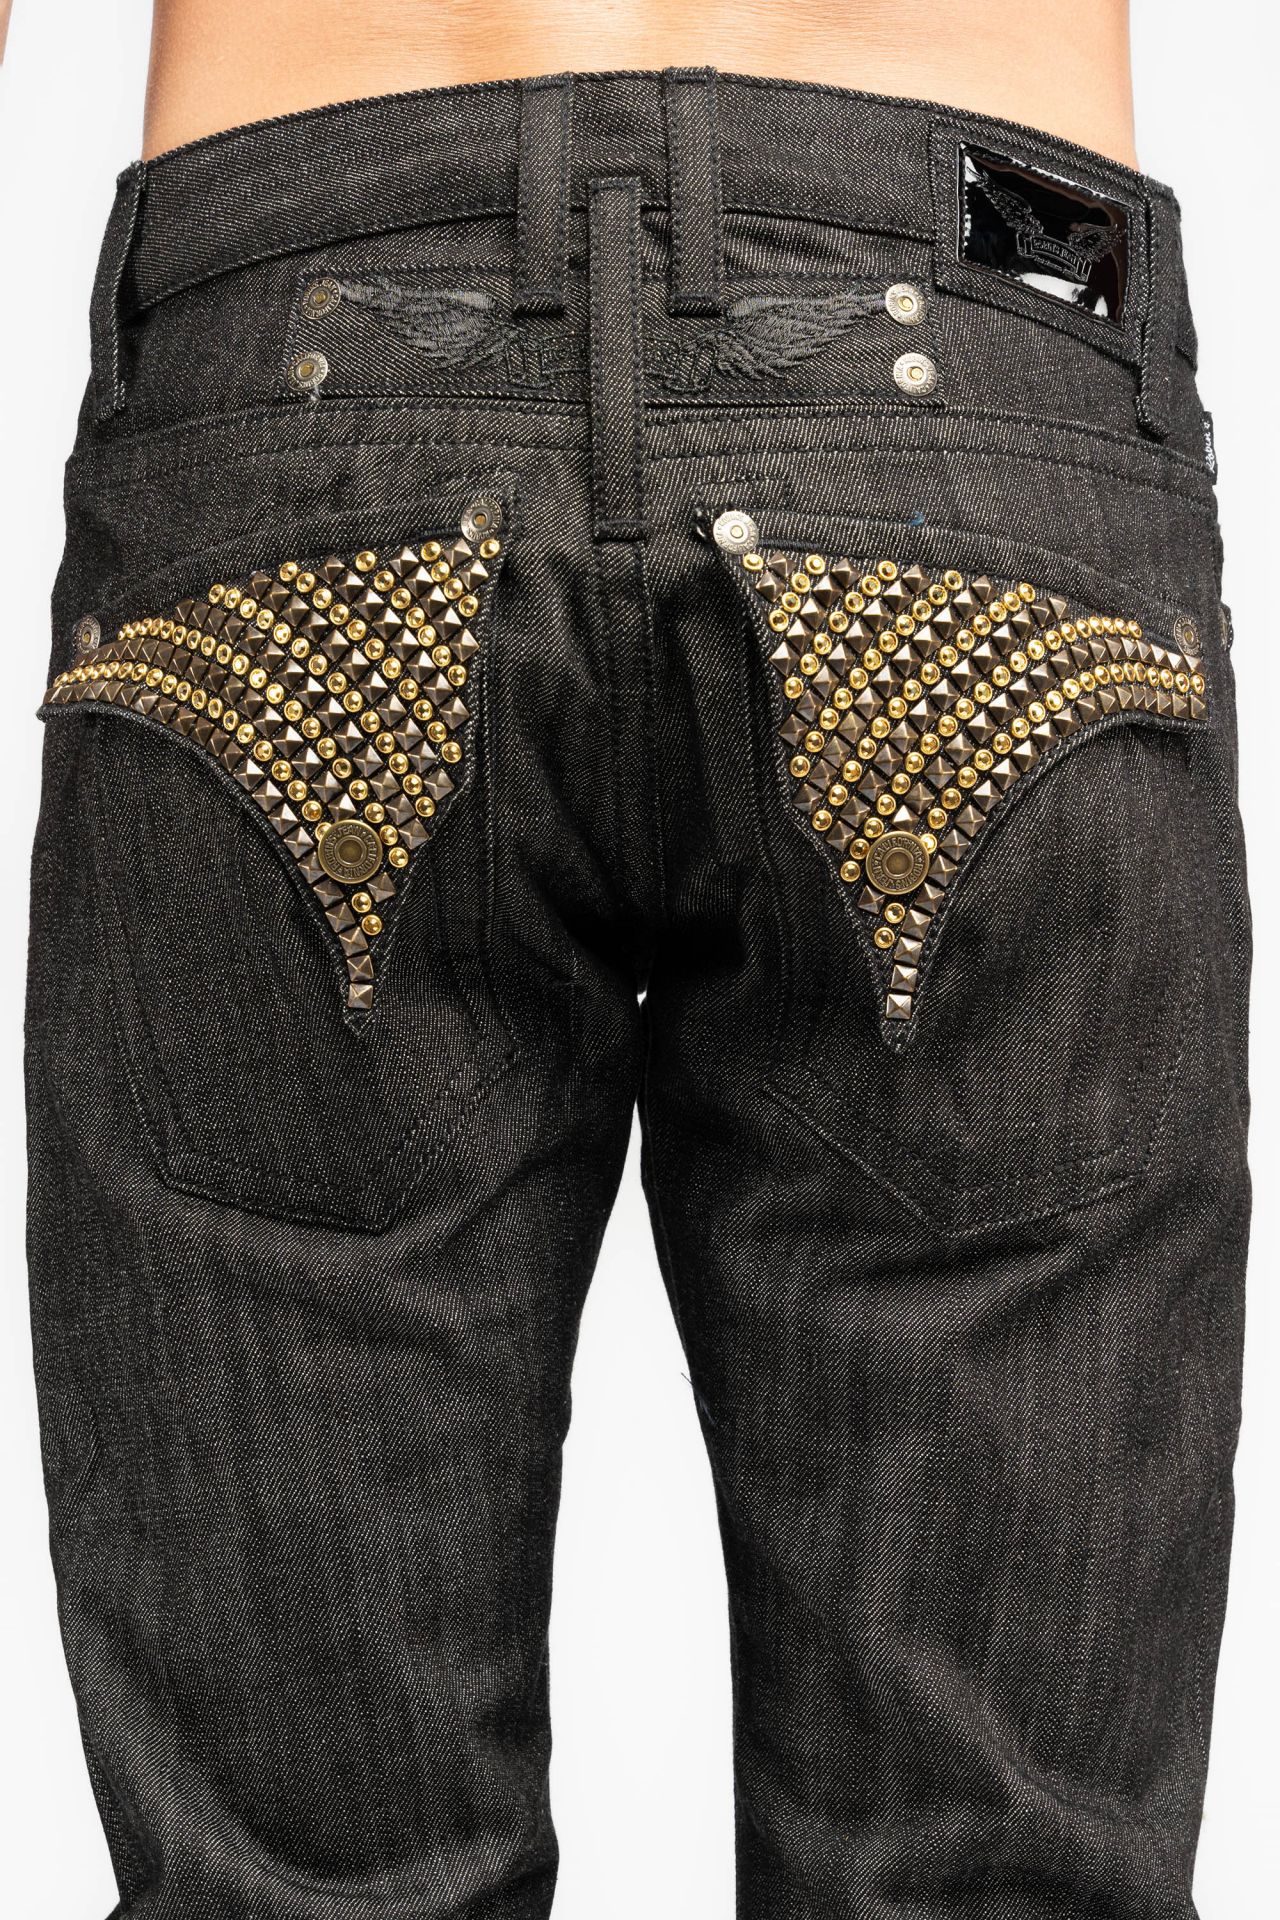 RAW DENIM COLLECTION MENS STRAIGHT LEG LONG FLAP JEANS WITH STUDS AND CRYSTALS